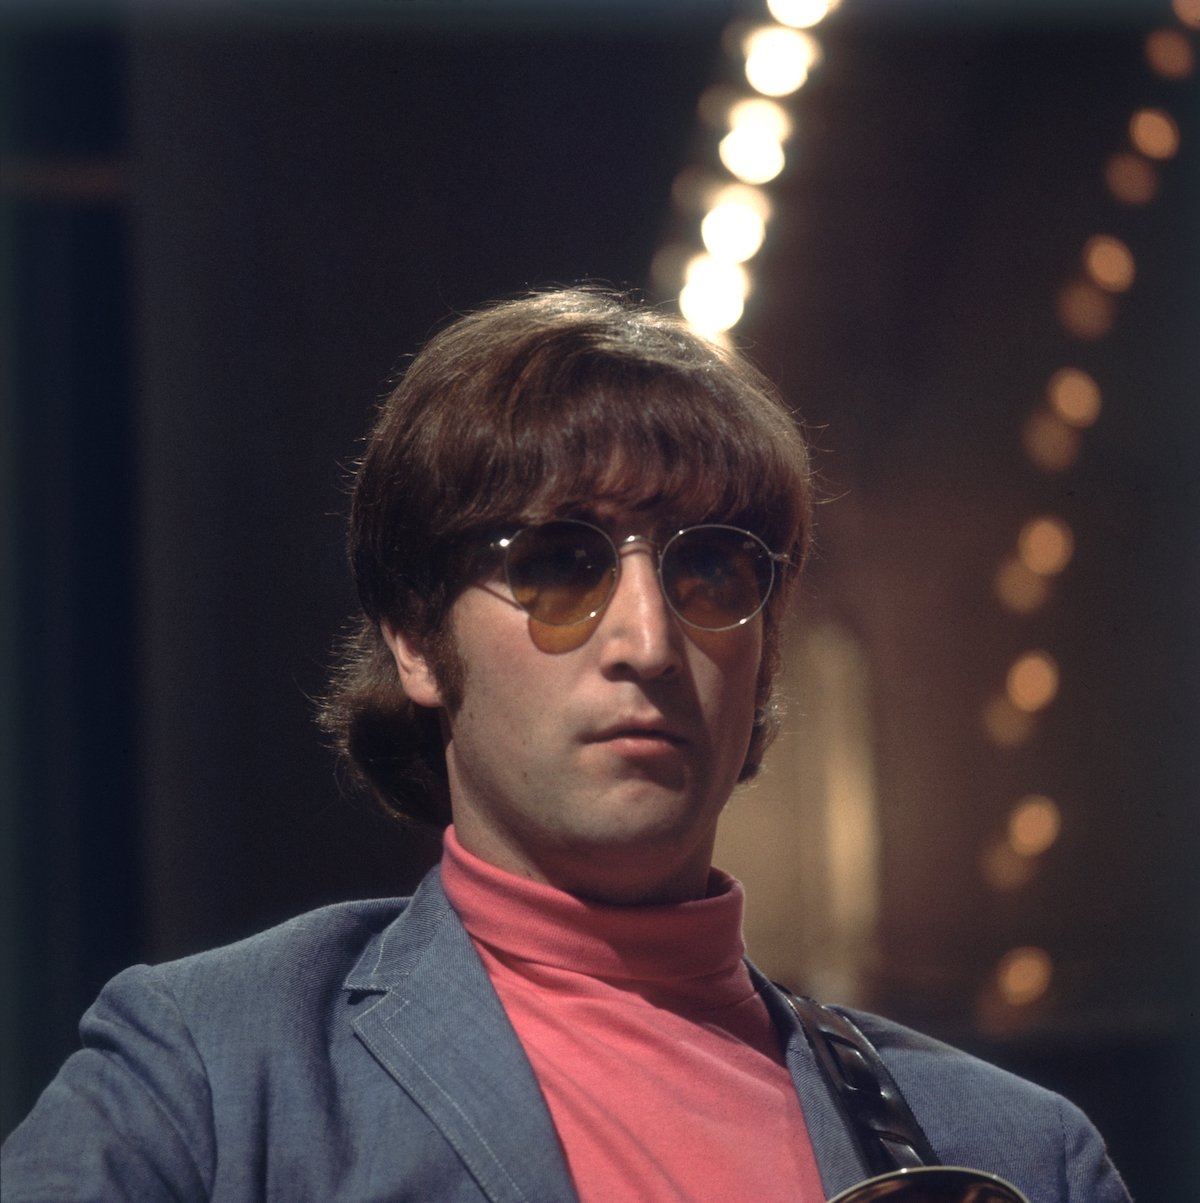 The Beatles' John Lennon wears sunglasses and his guitar strapped to his shoulder